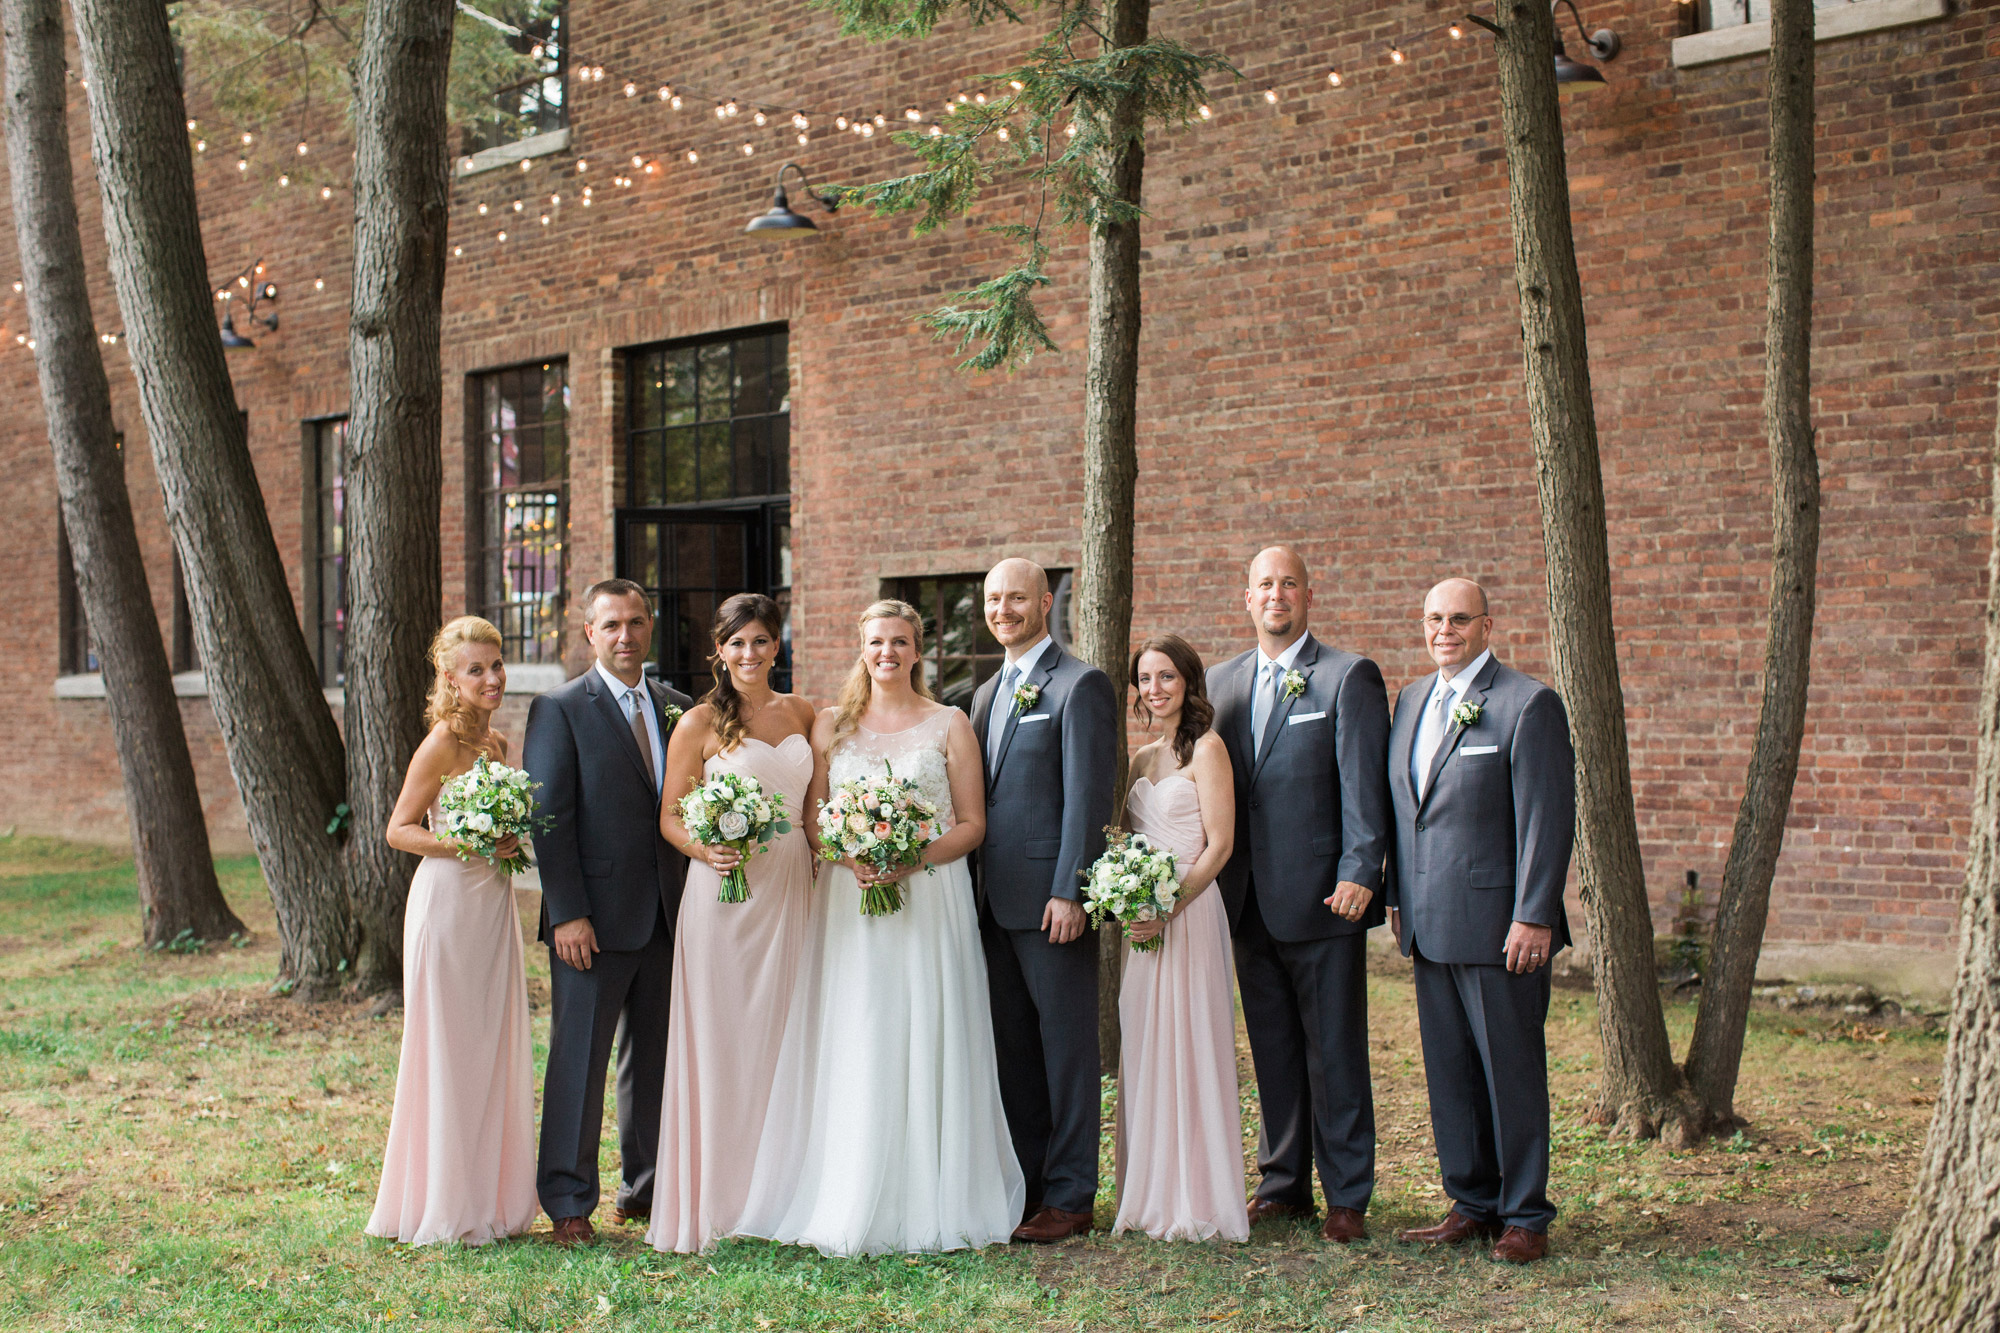 Industrial wedding at The Senate Garage in Kingston, New York in the Hudson Valley. Photos by Kelly Kollar Photography.